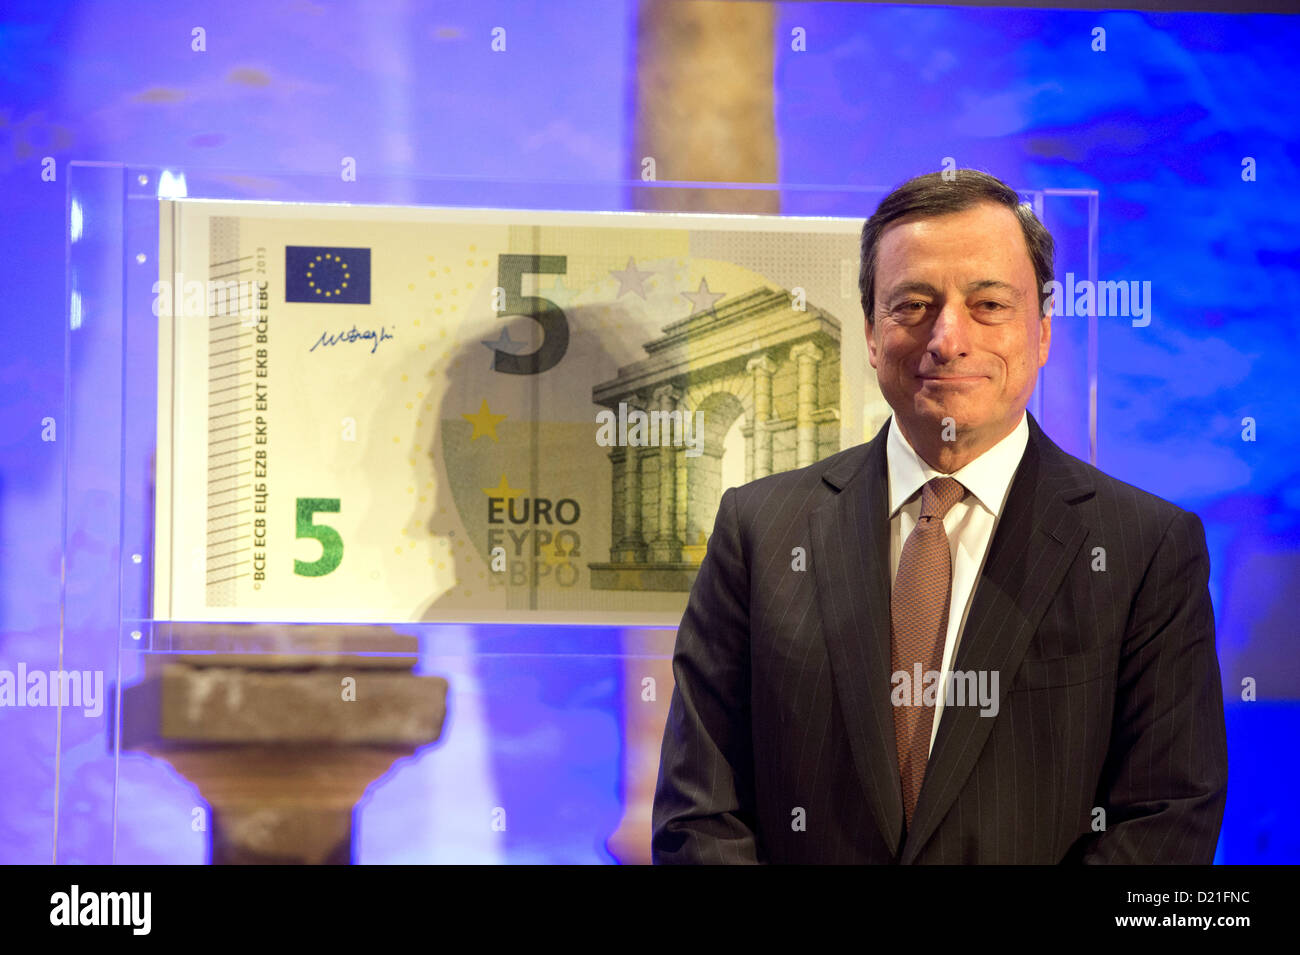 ECB President Mario Draghi unveils the new 5 euro banknote at the Archaeological Museum in Frankfurt Main, Germany, 10 January 2013. The exhibition 'The New Face of the Euro' is also on display in the museum at the same time. Photo: BORIS ROESSLER Stock Photo